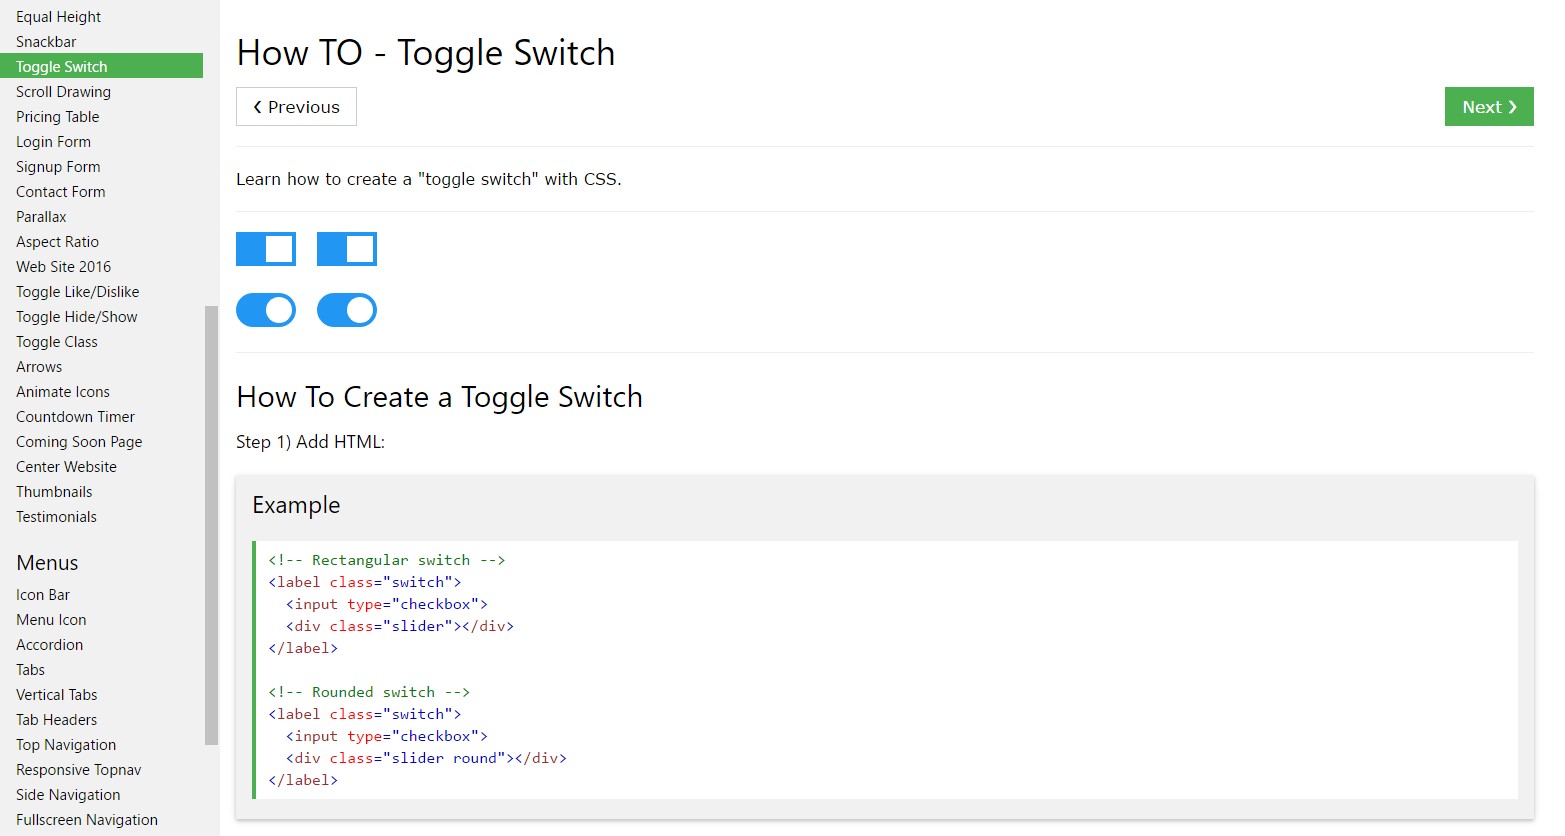  Tips on how to  generate Toggle Switch